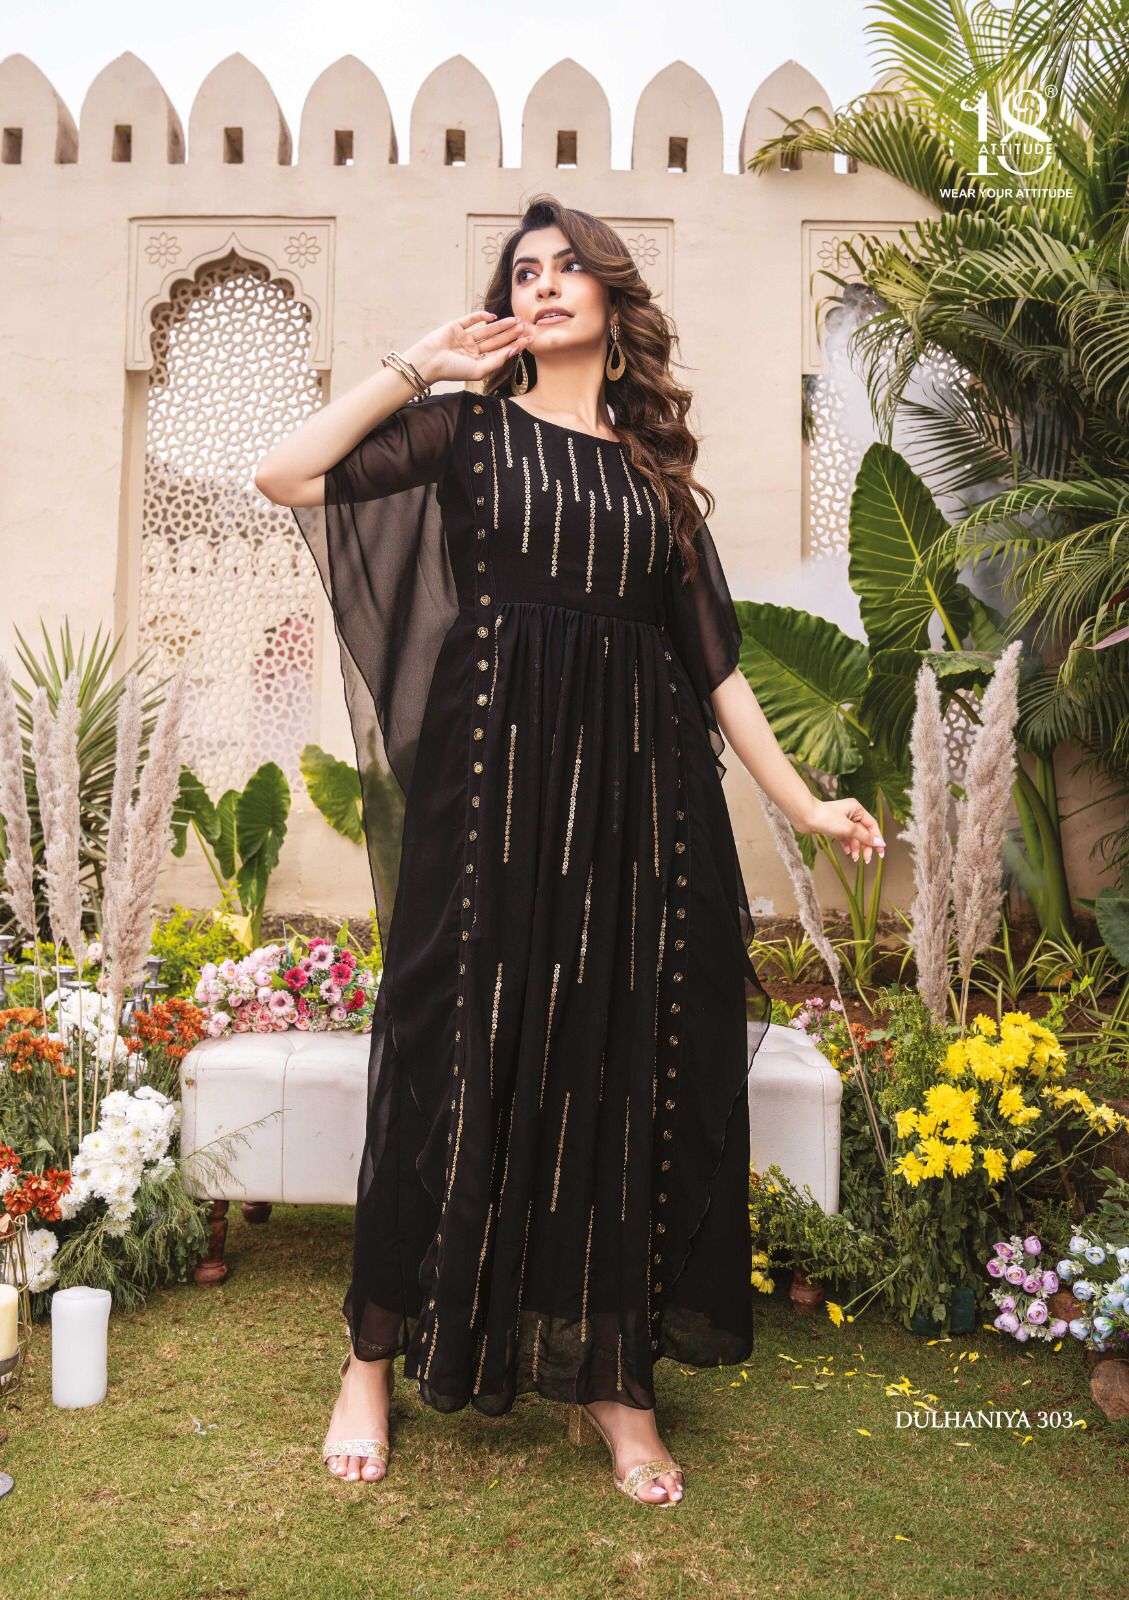 Dulhaniya Vol-3 By 18 Attitude 301 To 305 Series Beautiful Stylish Fancy Colorful Casual Wear & Ethnic Wear Bemberg Georgette Gowns At Wholesale Price